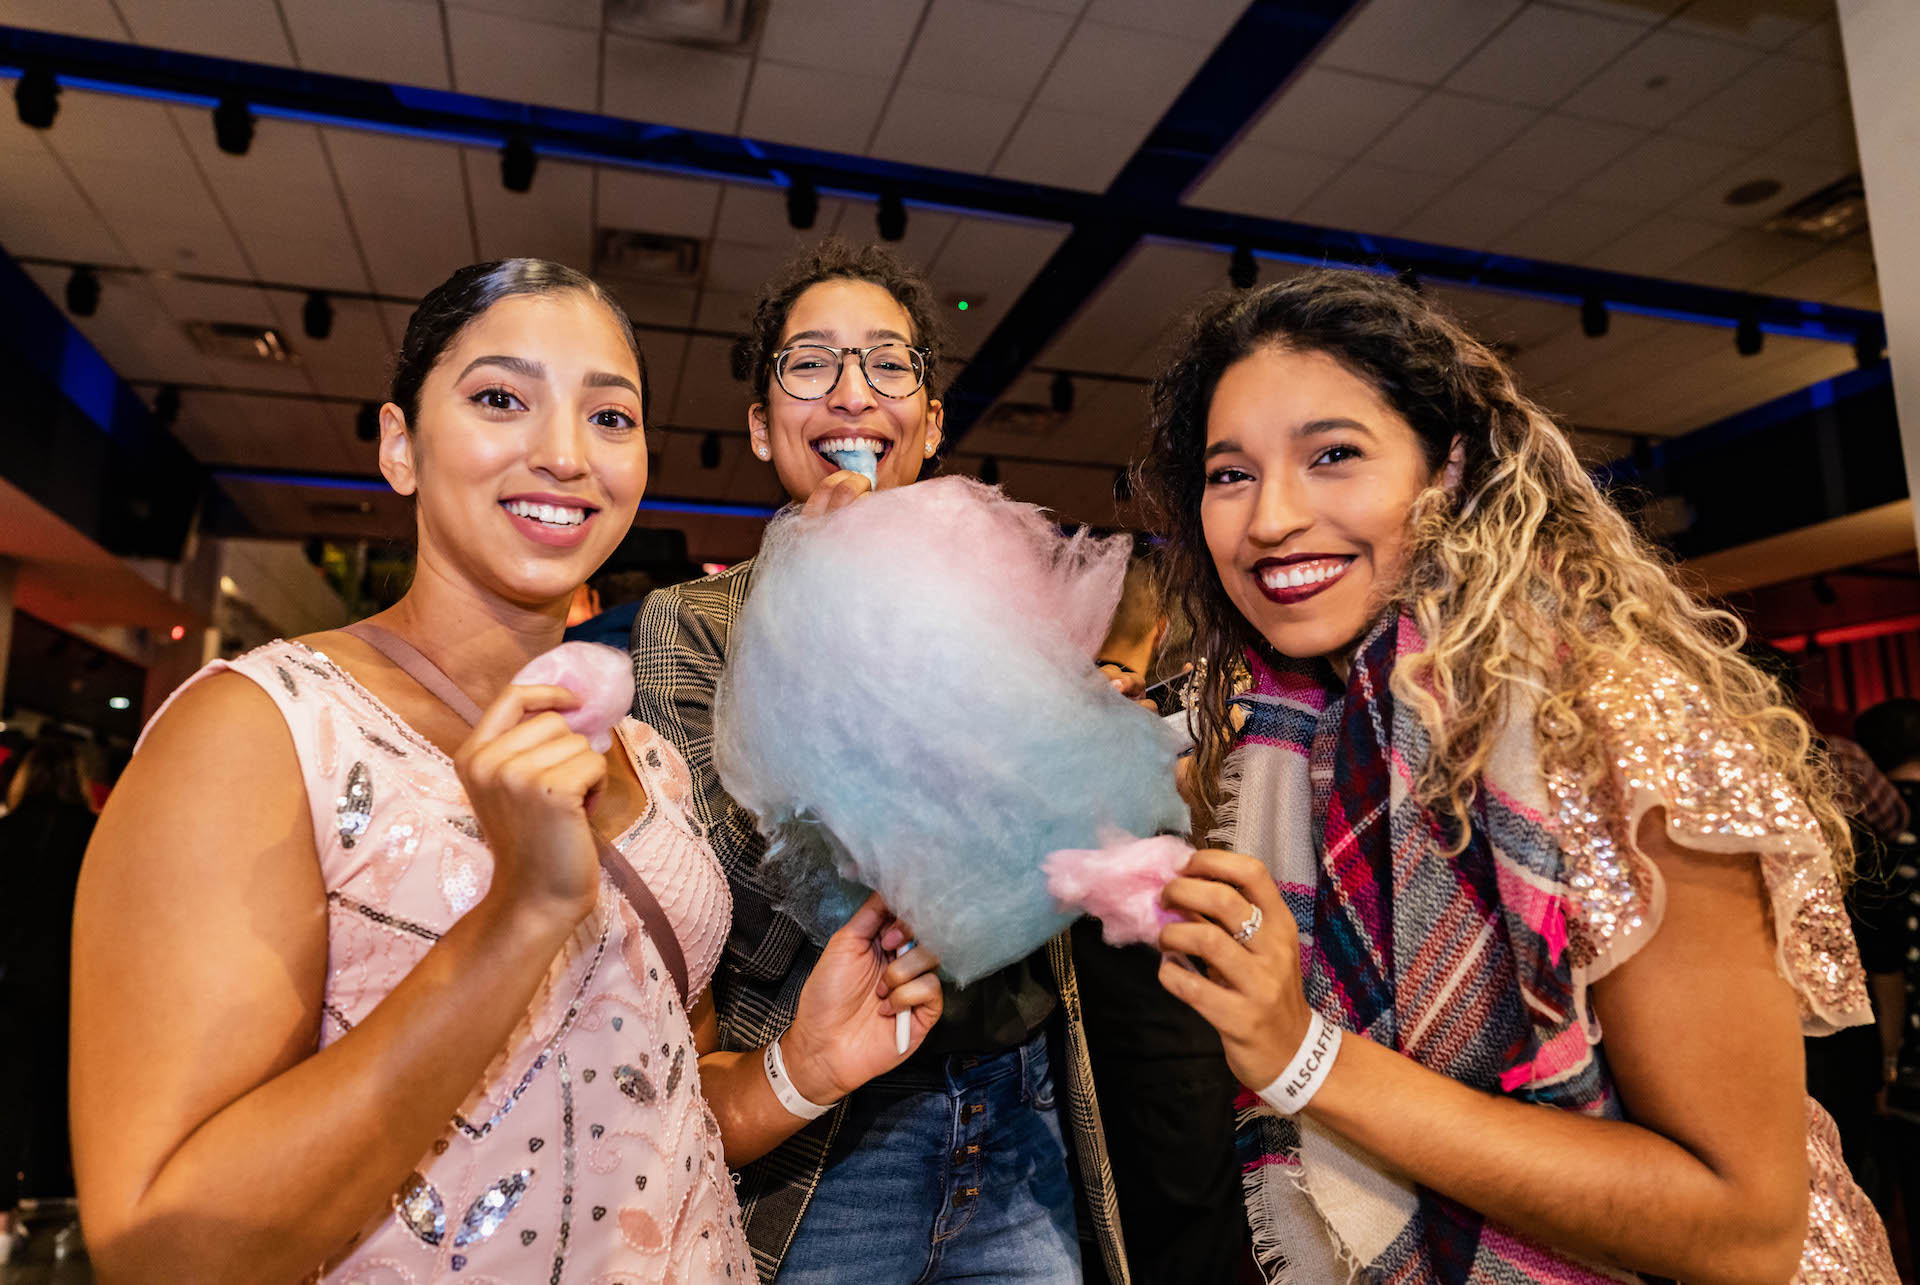 LSC After Dark guests eating cotton candy